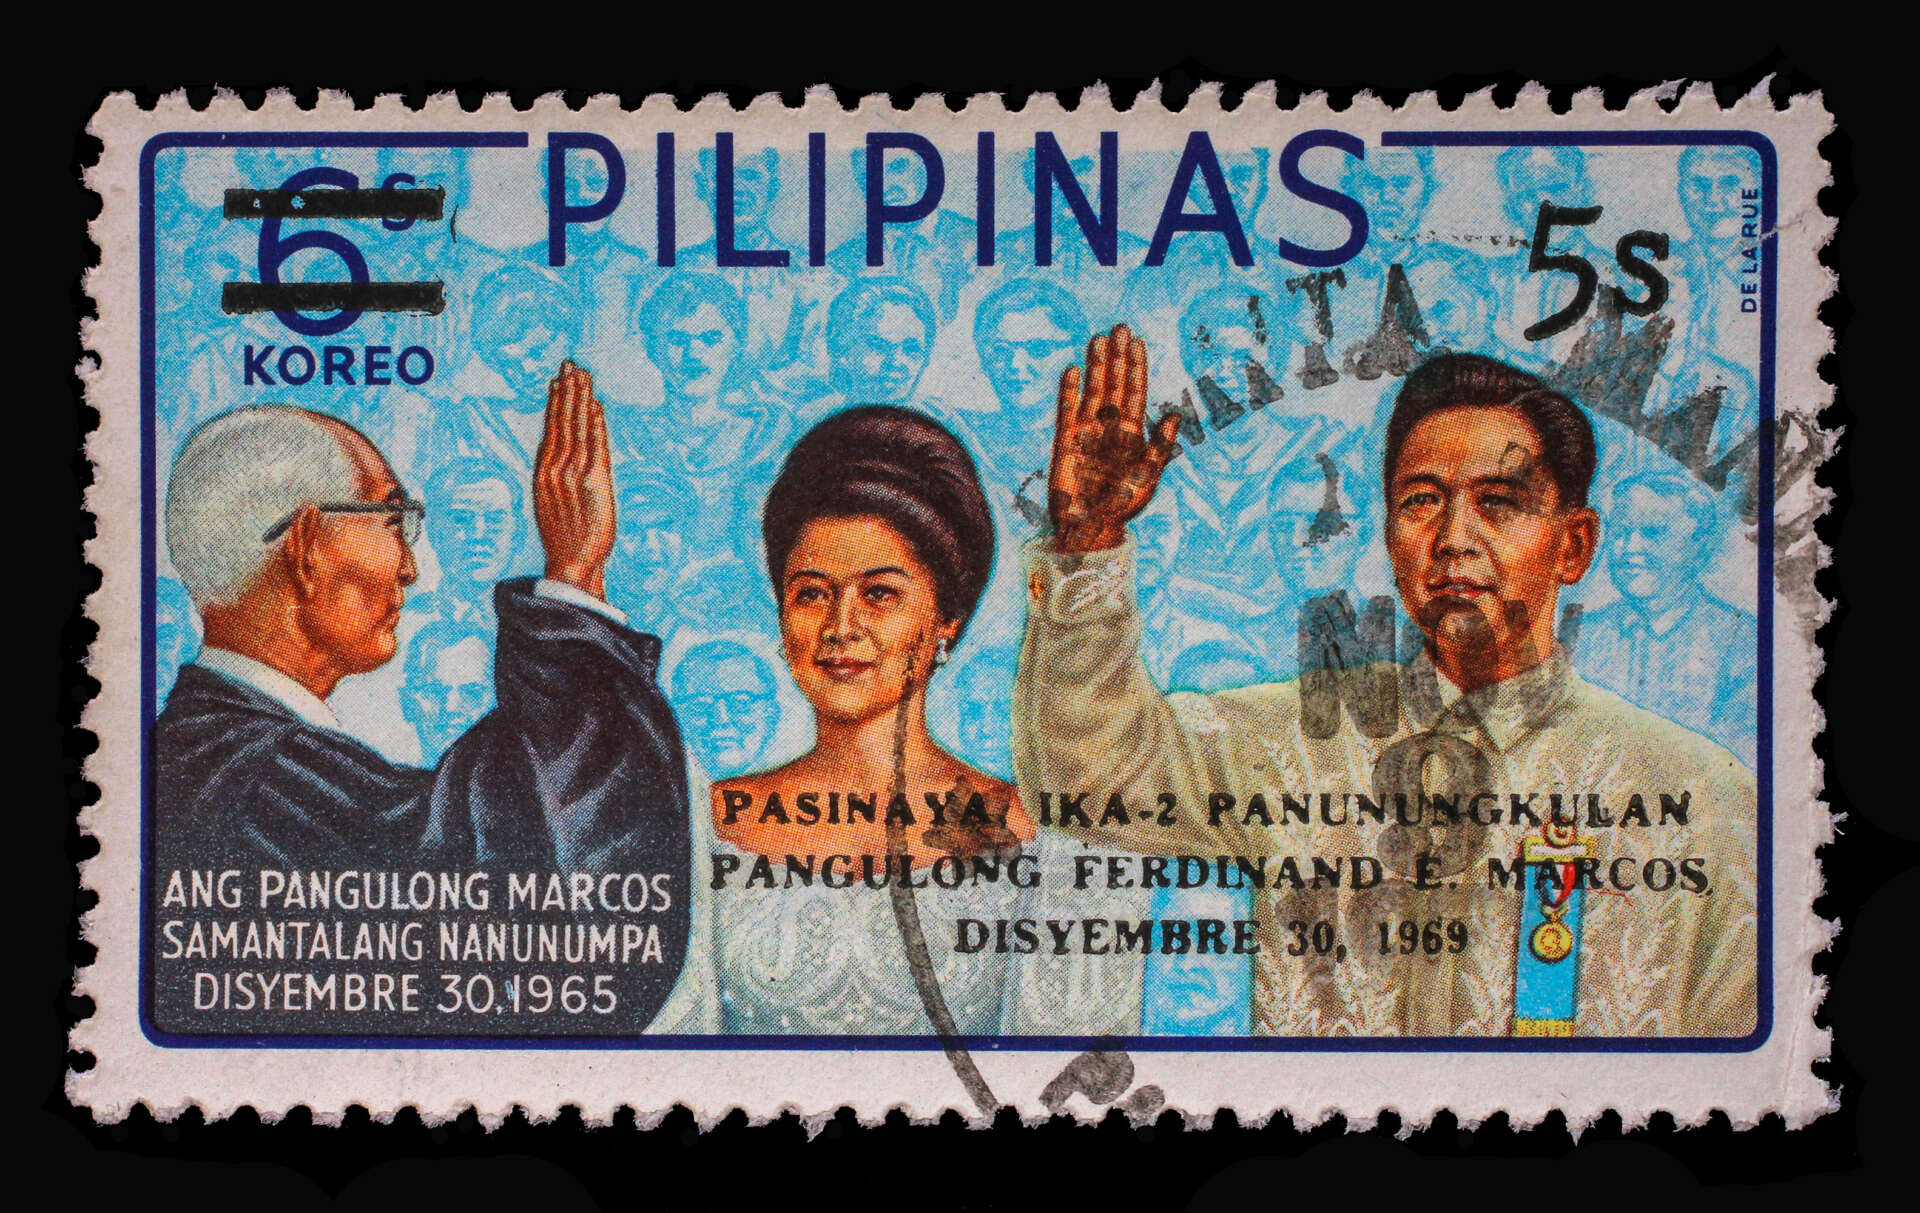 Filipiniana History shown in stamp